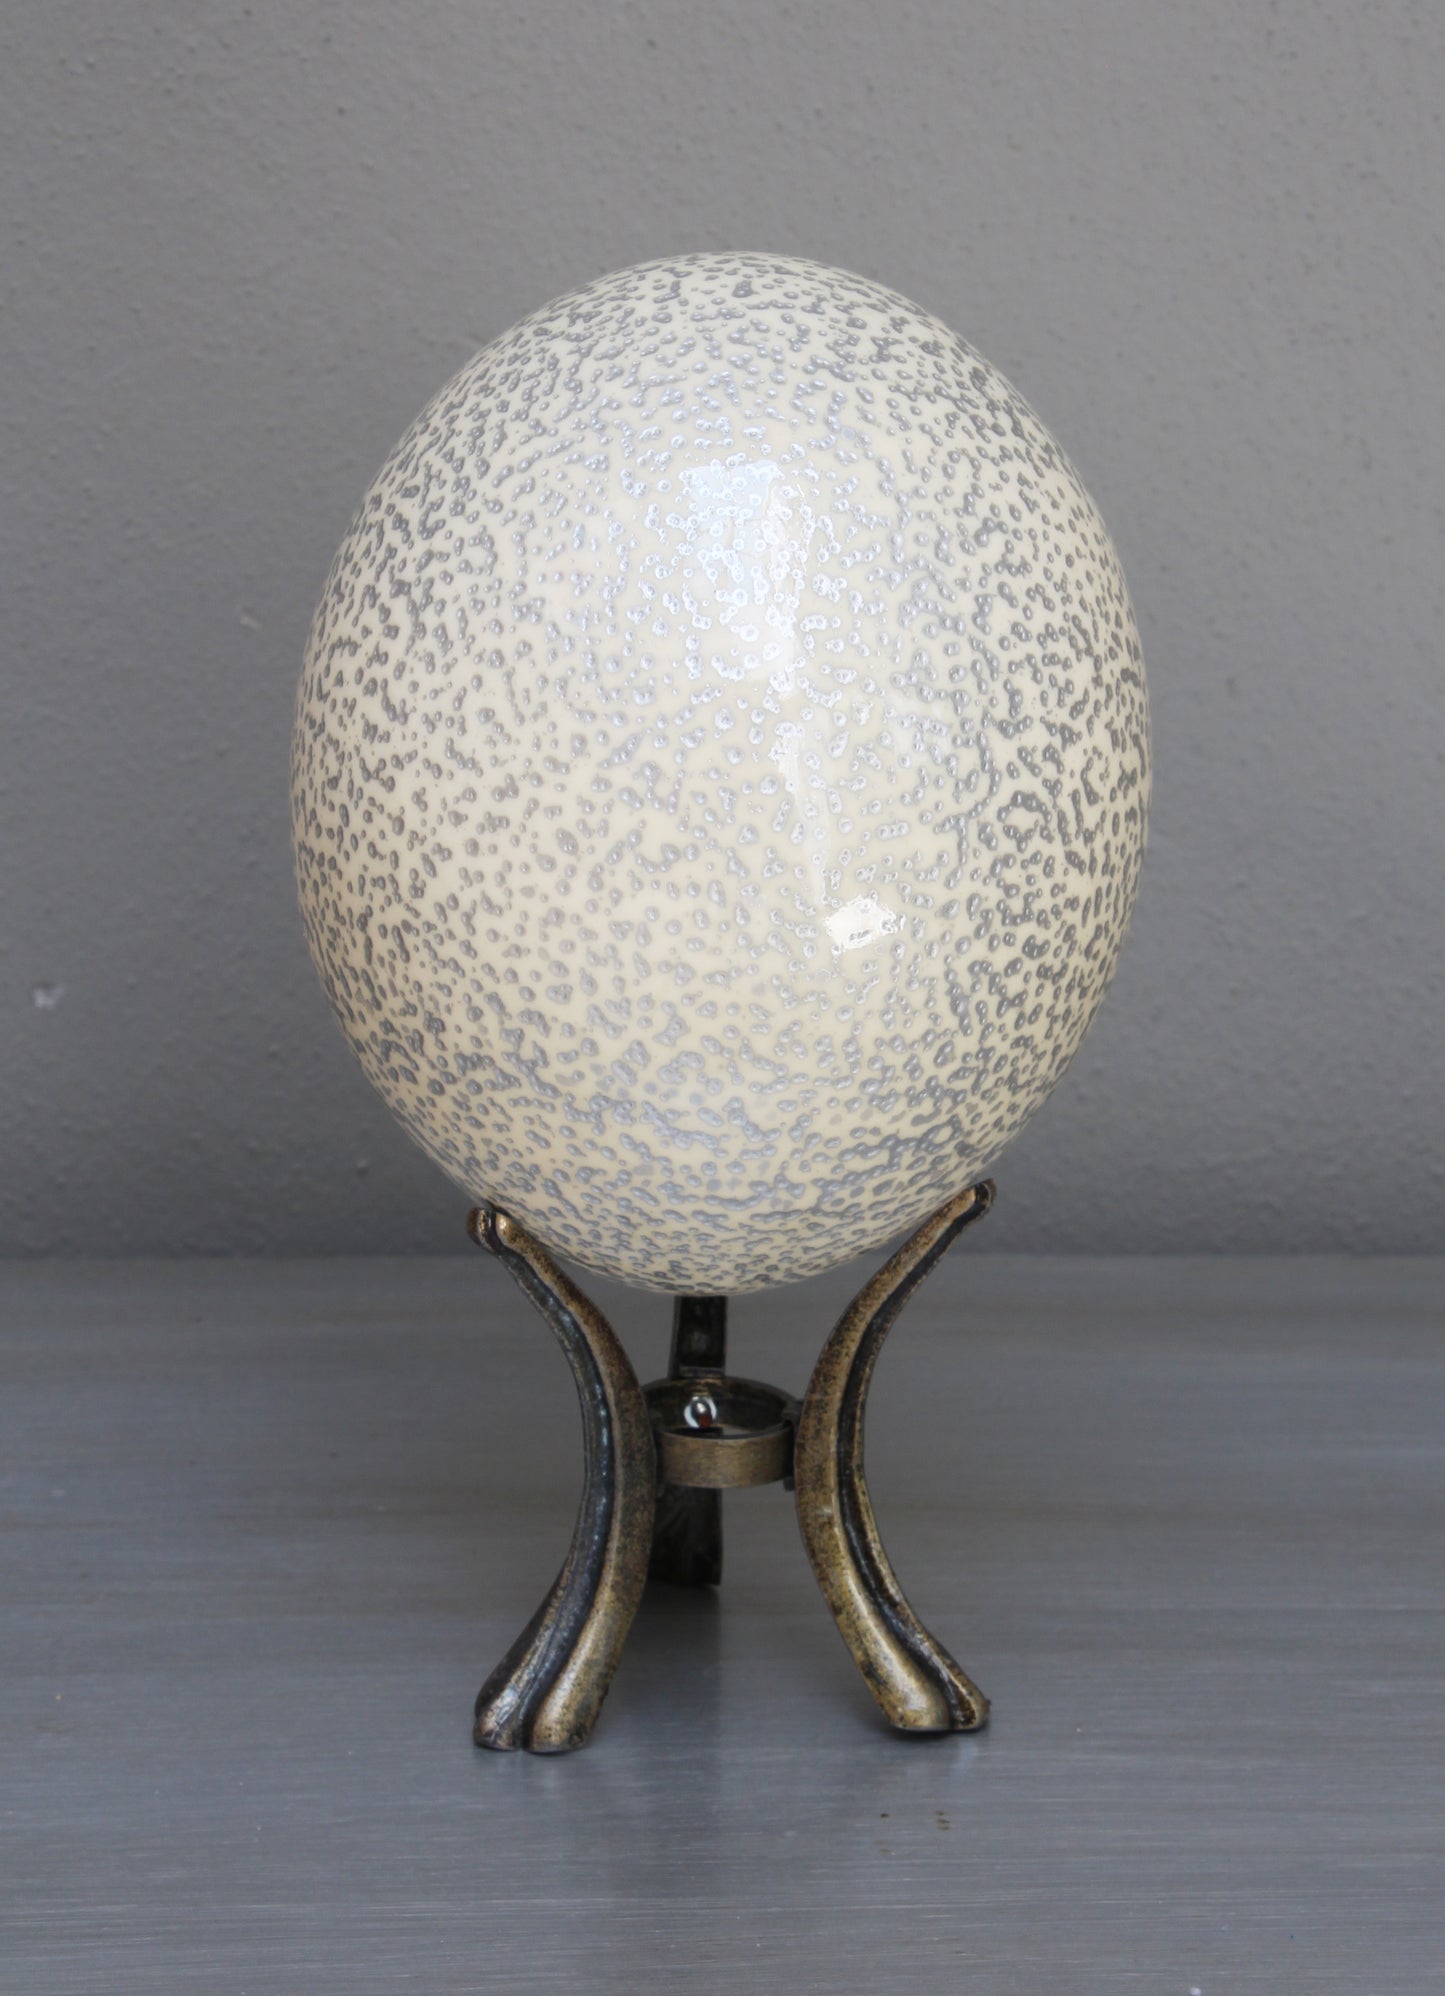 Speckled cream and silver ostrich egg